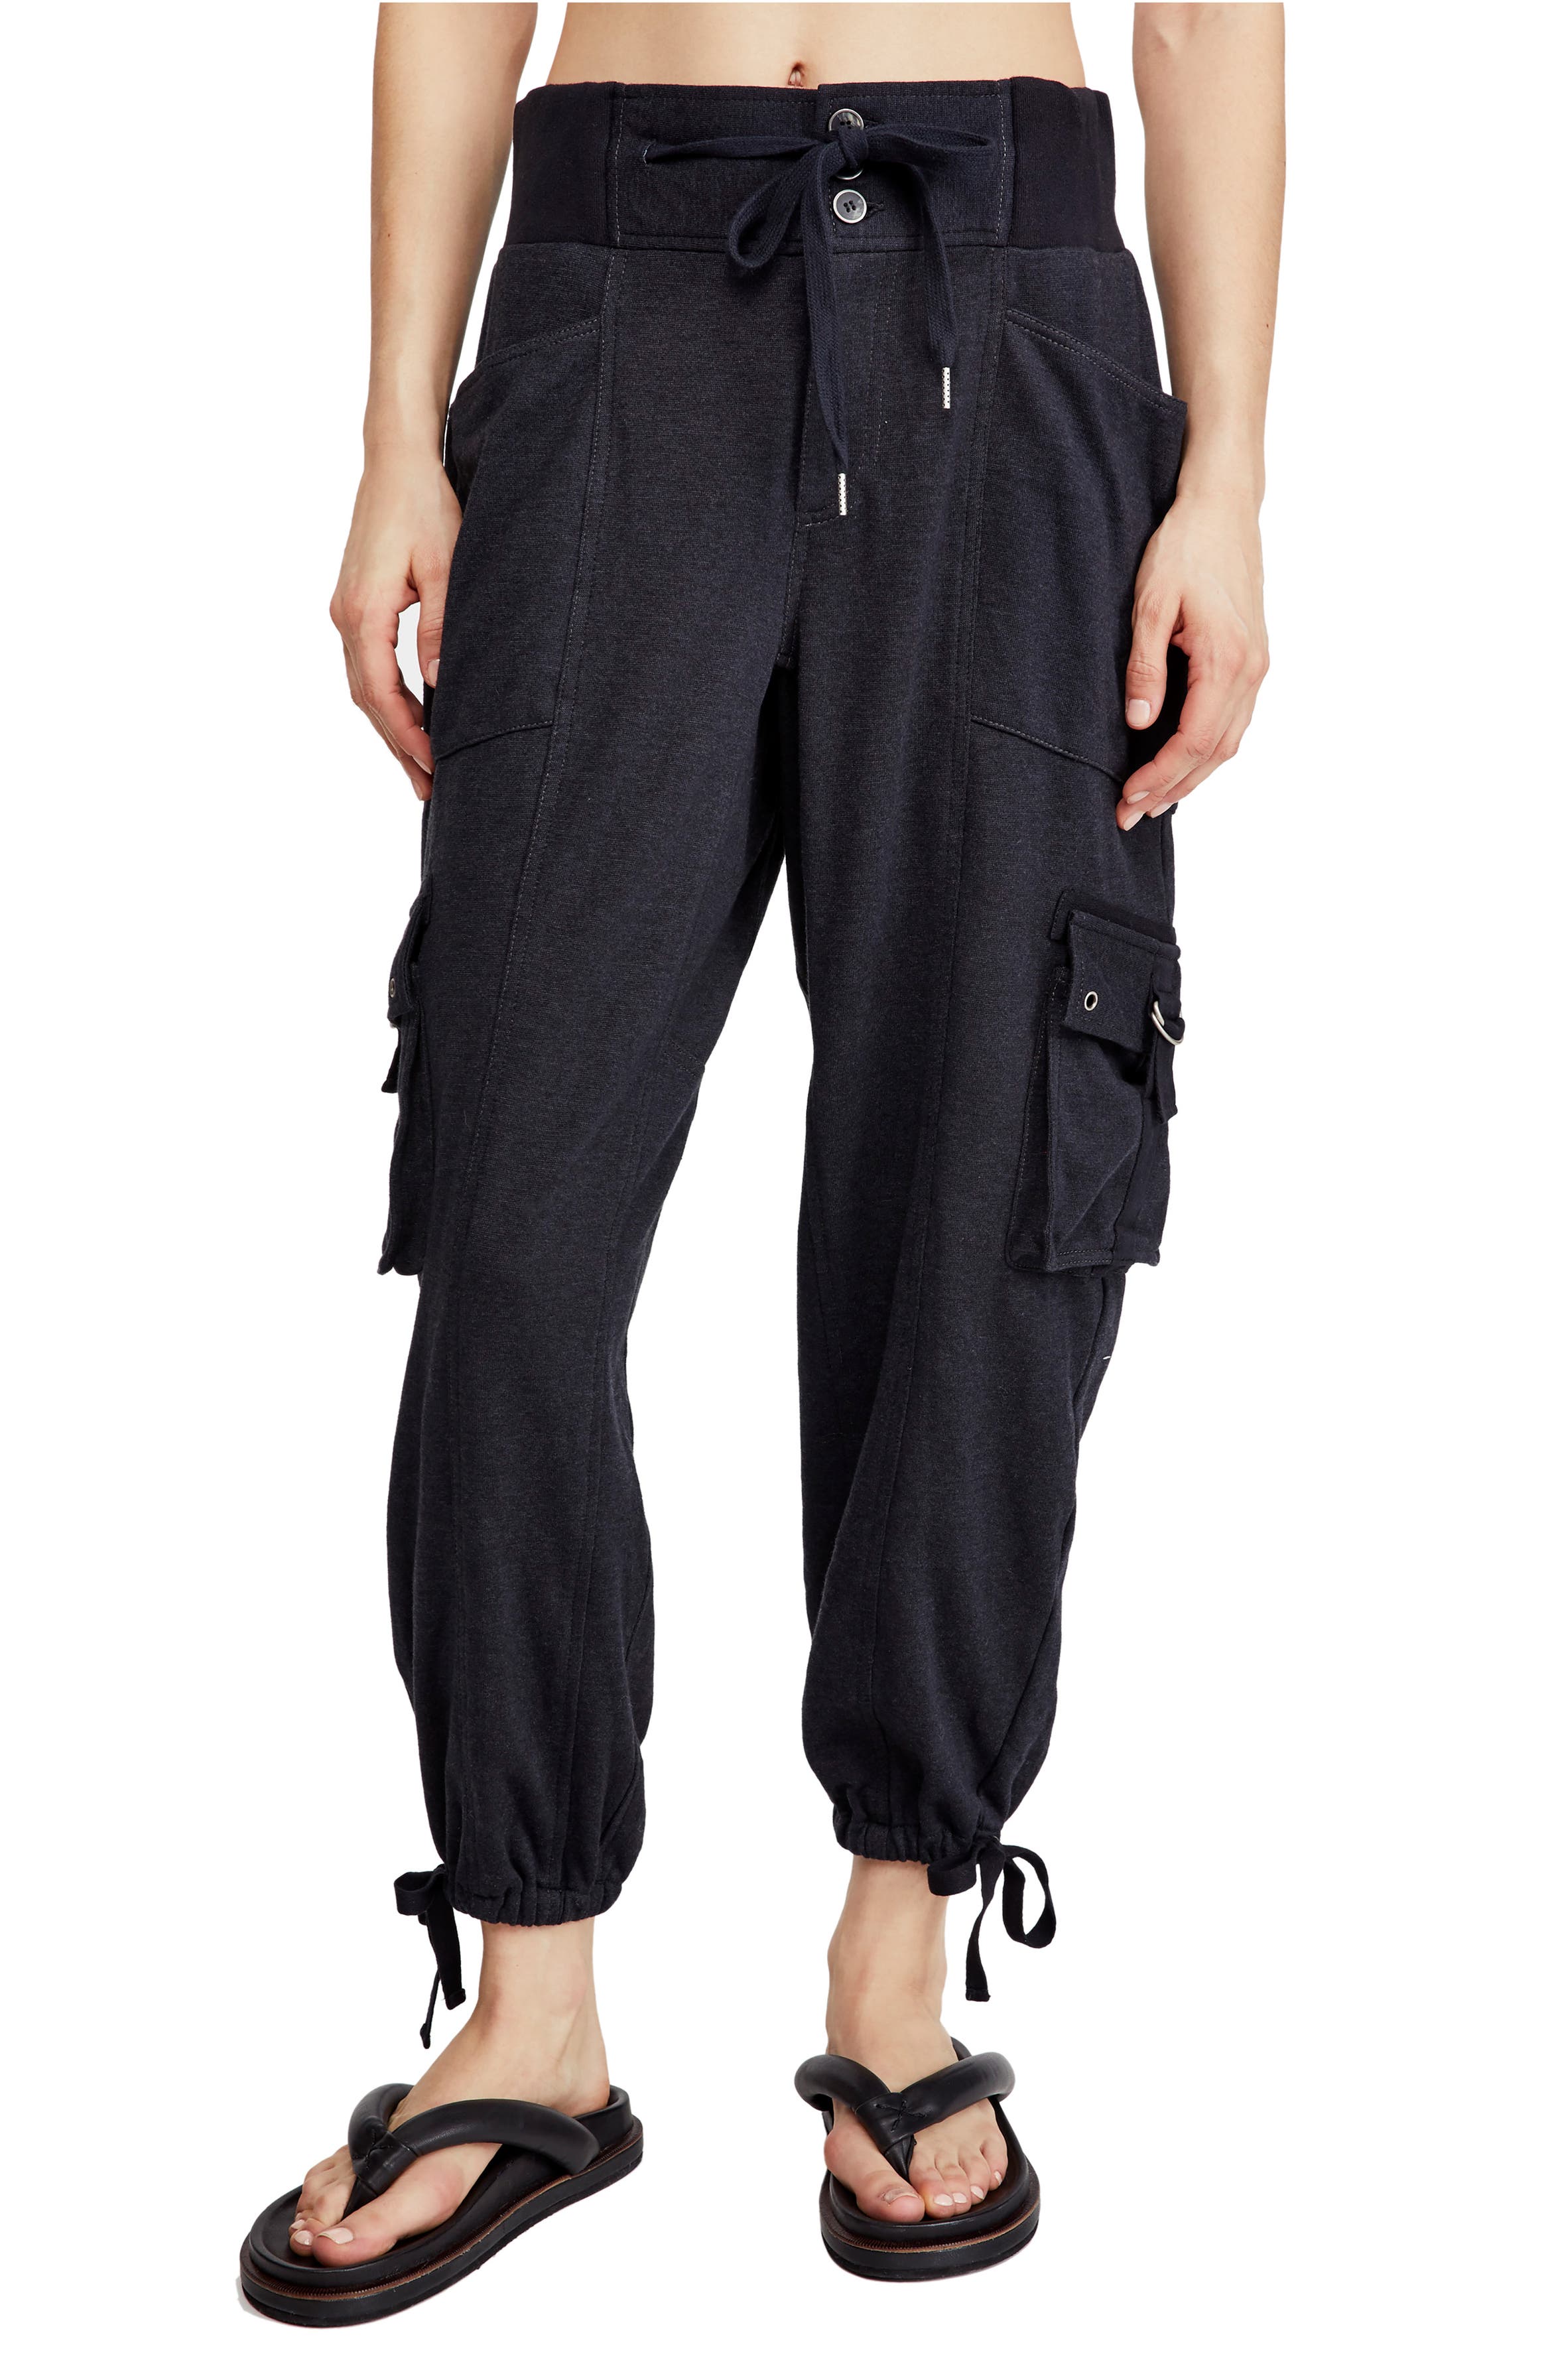 Free People Semi Charmed Jogger Pants | Nordstrom